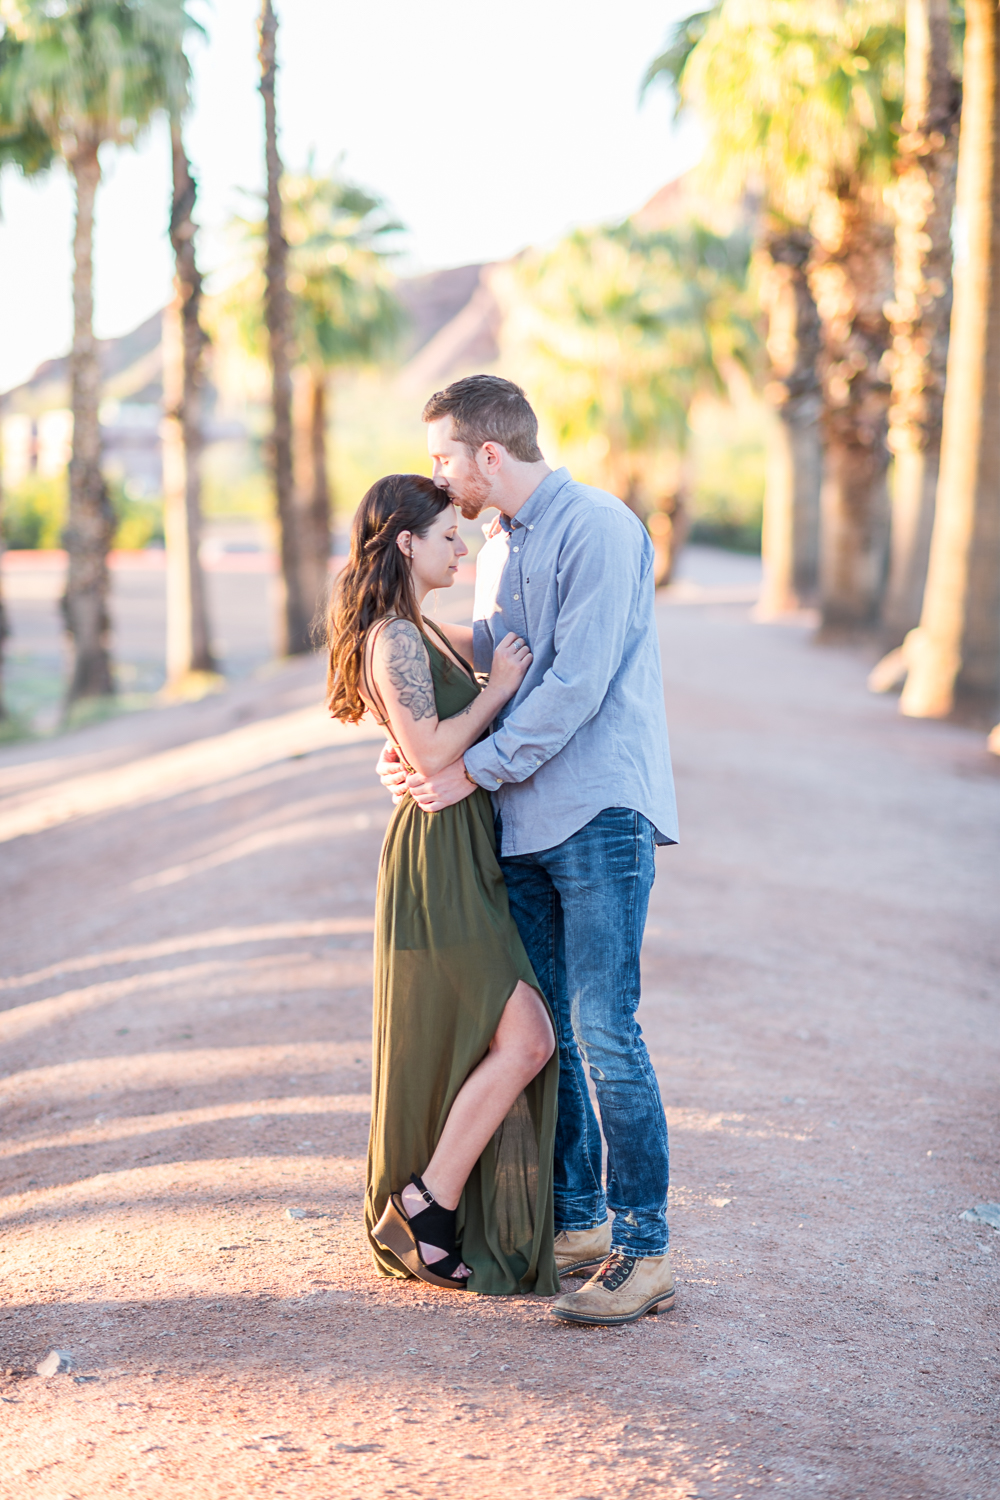 How to Chose a Location for Your Engagement Session - Hunter and Sarah Photography